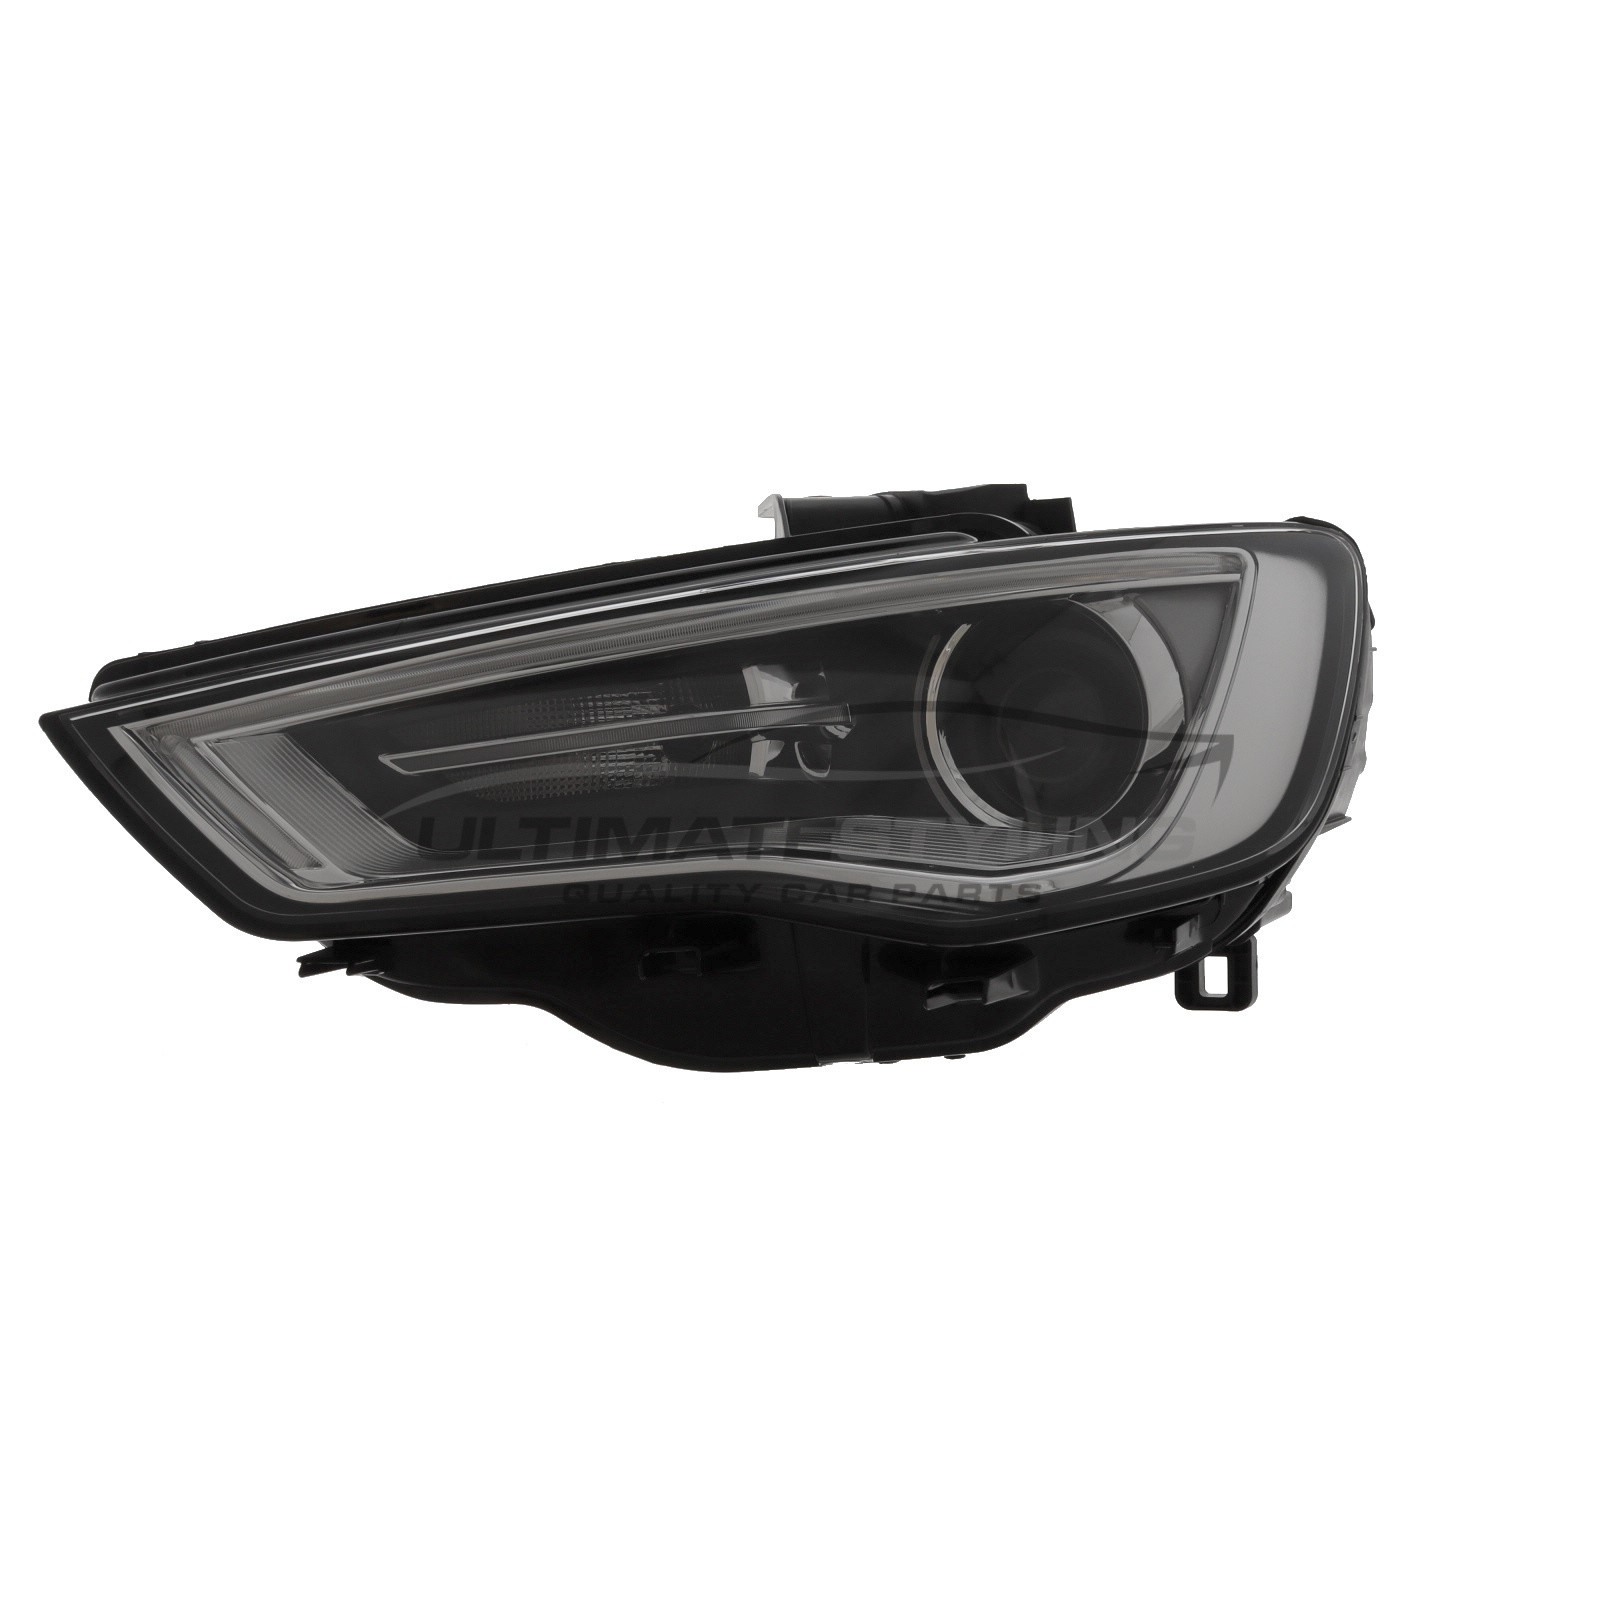 Audi A3 2012-2016, RS3 2012-2016, S3 2012-2016 Xenon With LED Daytime Running Lamp, Electric With Motor, Black Headlight / Headlamp Passengers Side (LH)